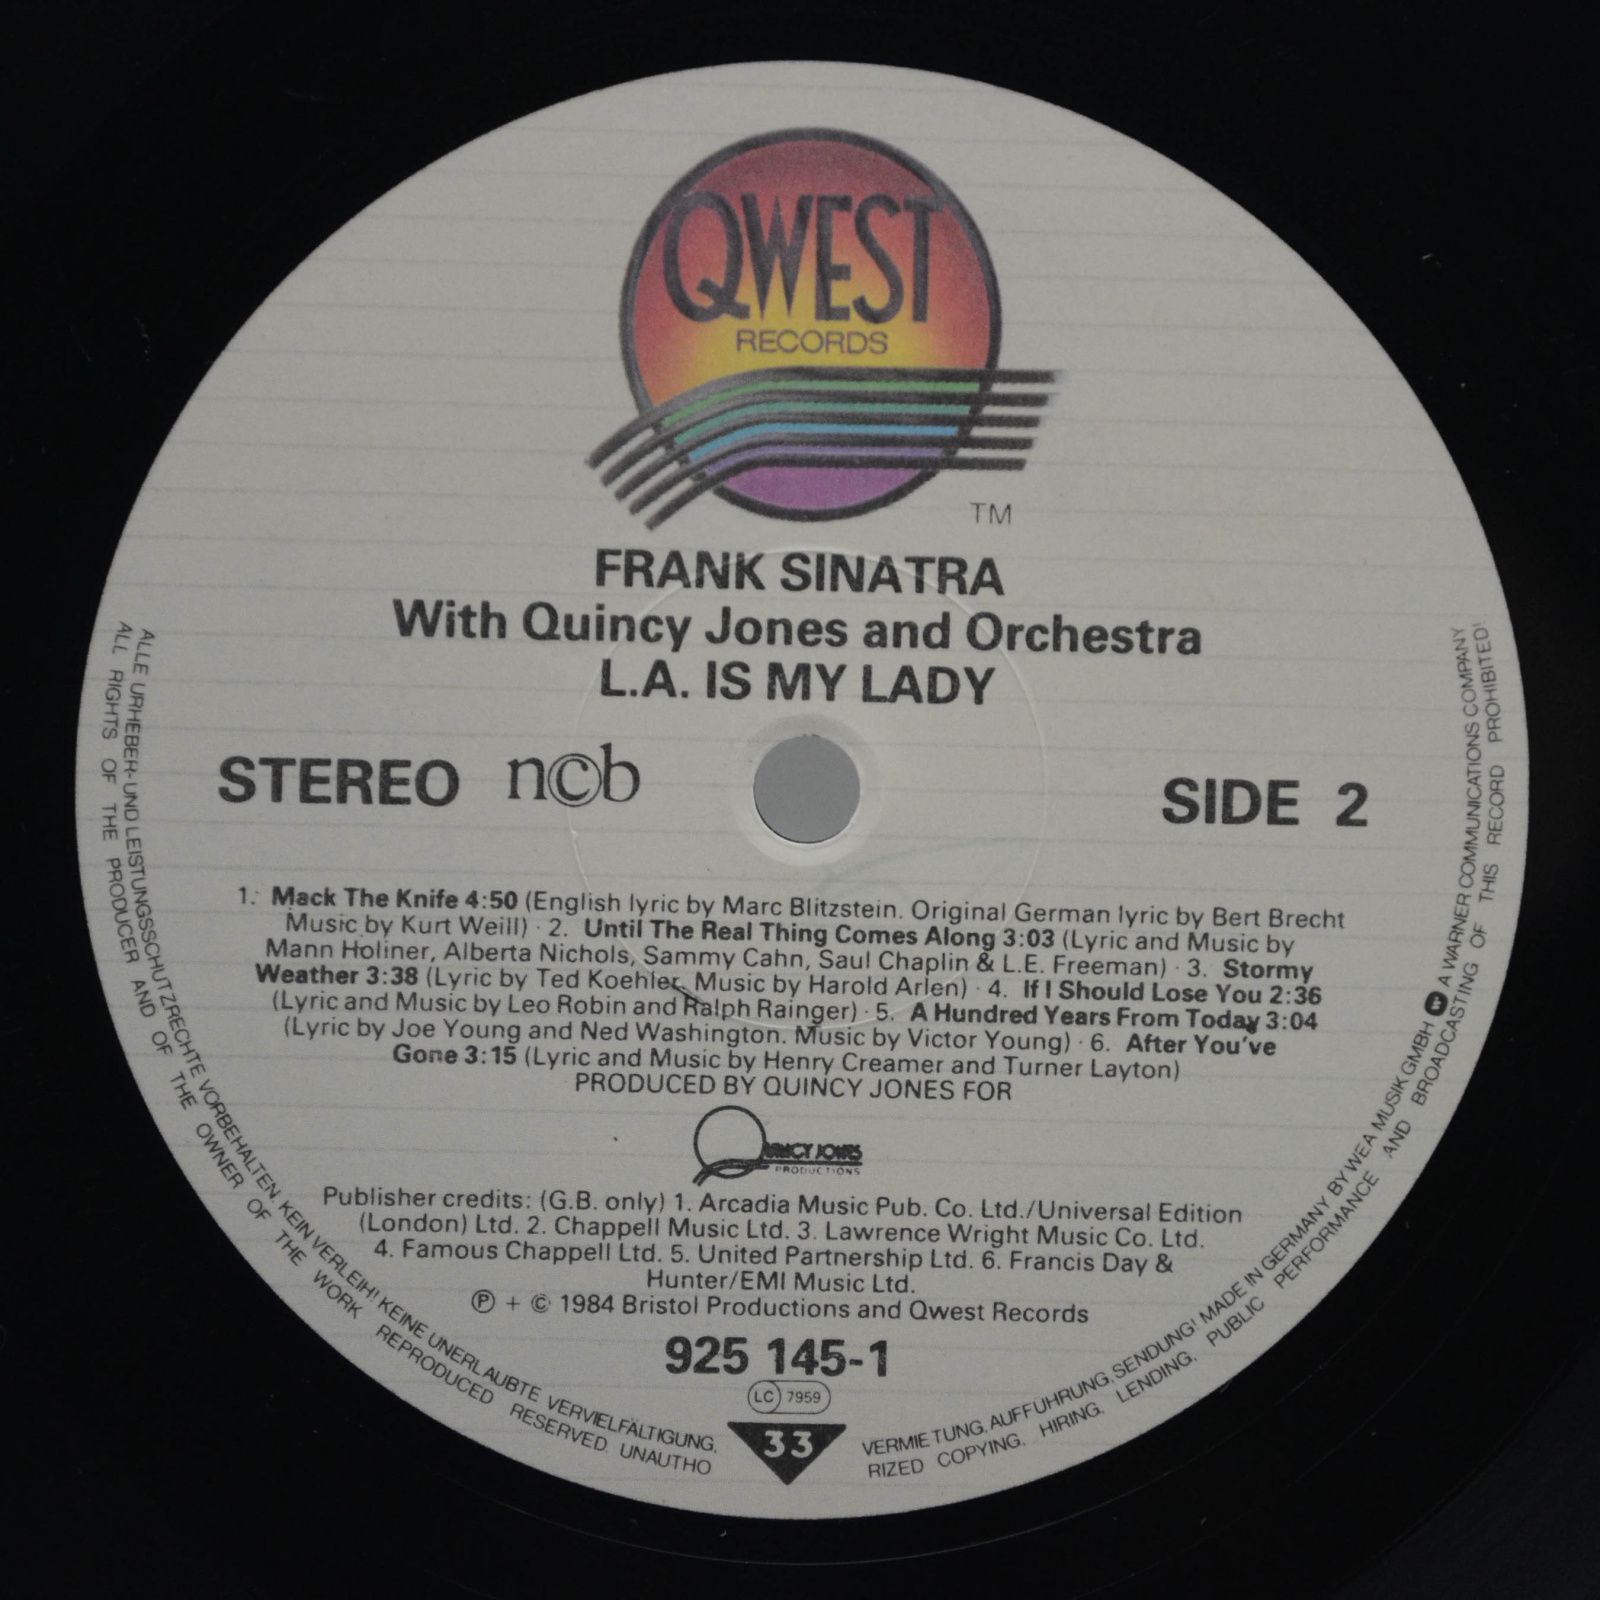 Frank Sinatra With Quincy Jones And Orchestra — L.A. Is My Lady, 1984